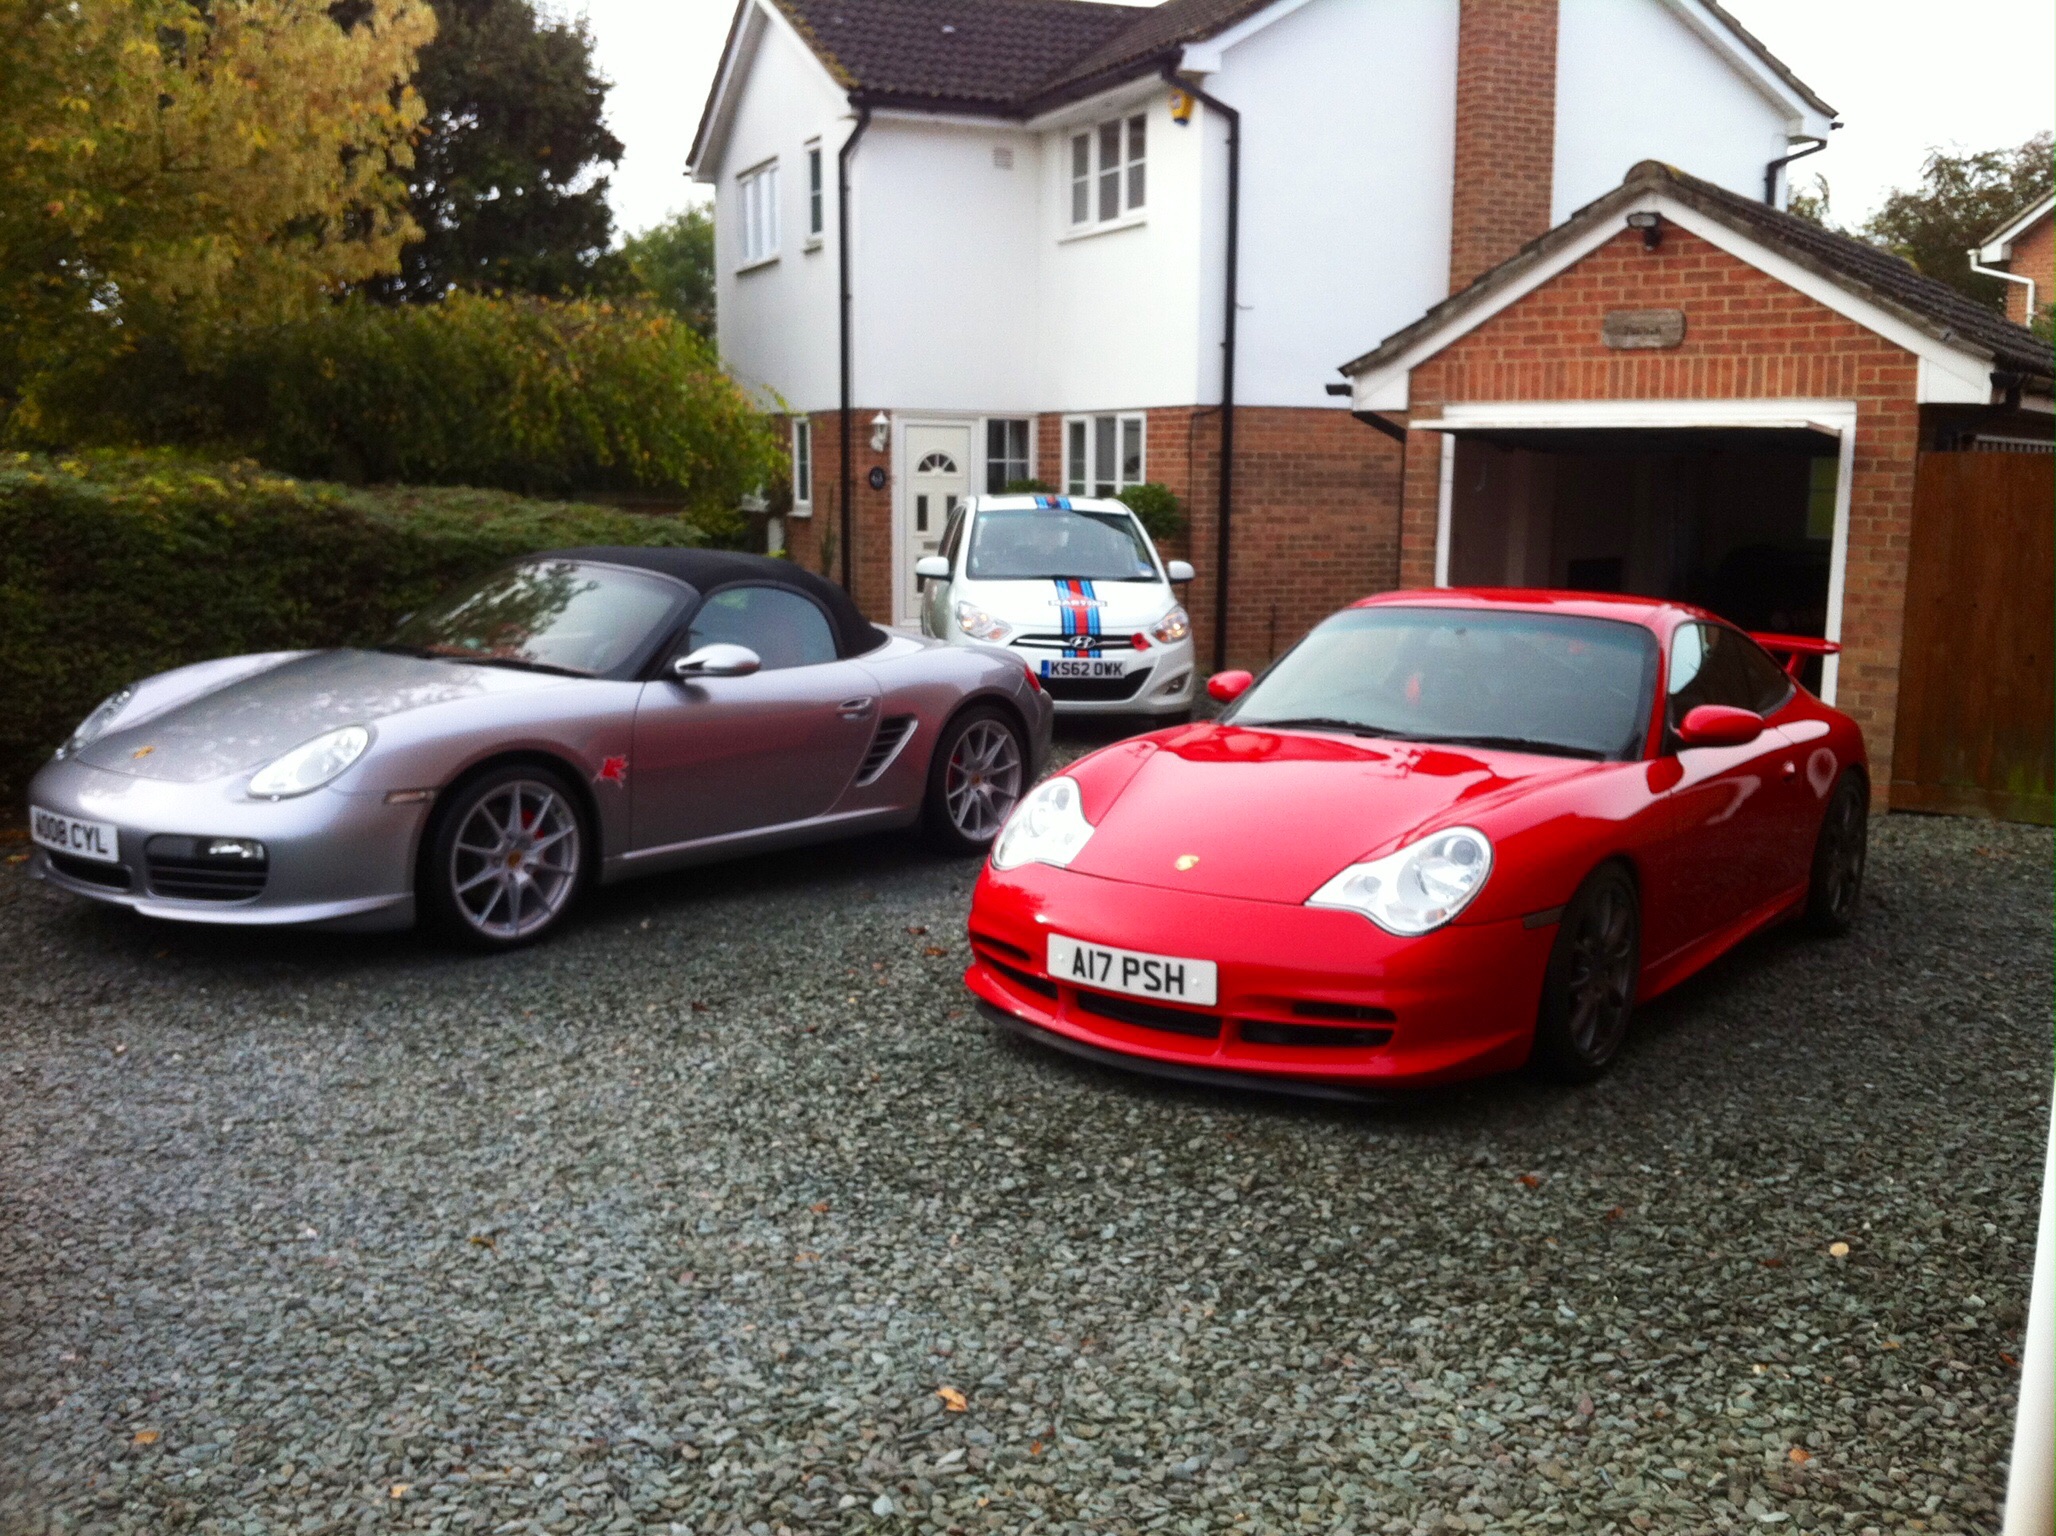 Boxster & Cayman Picture Thread - Page 16 - Boxster/Cayman - PistonHeads